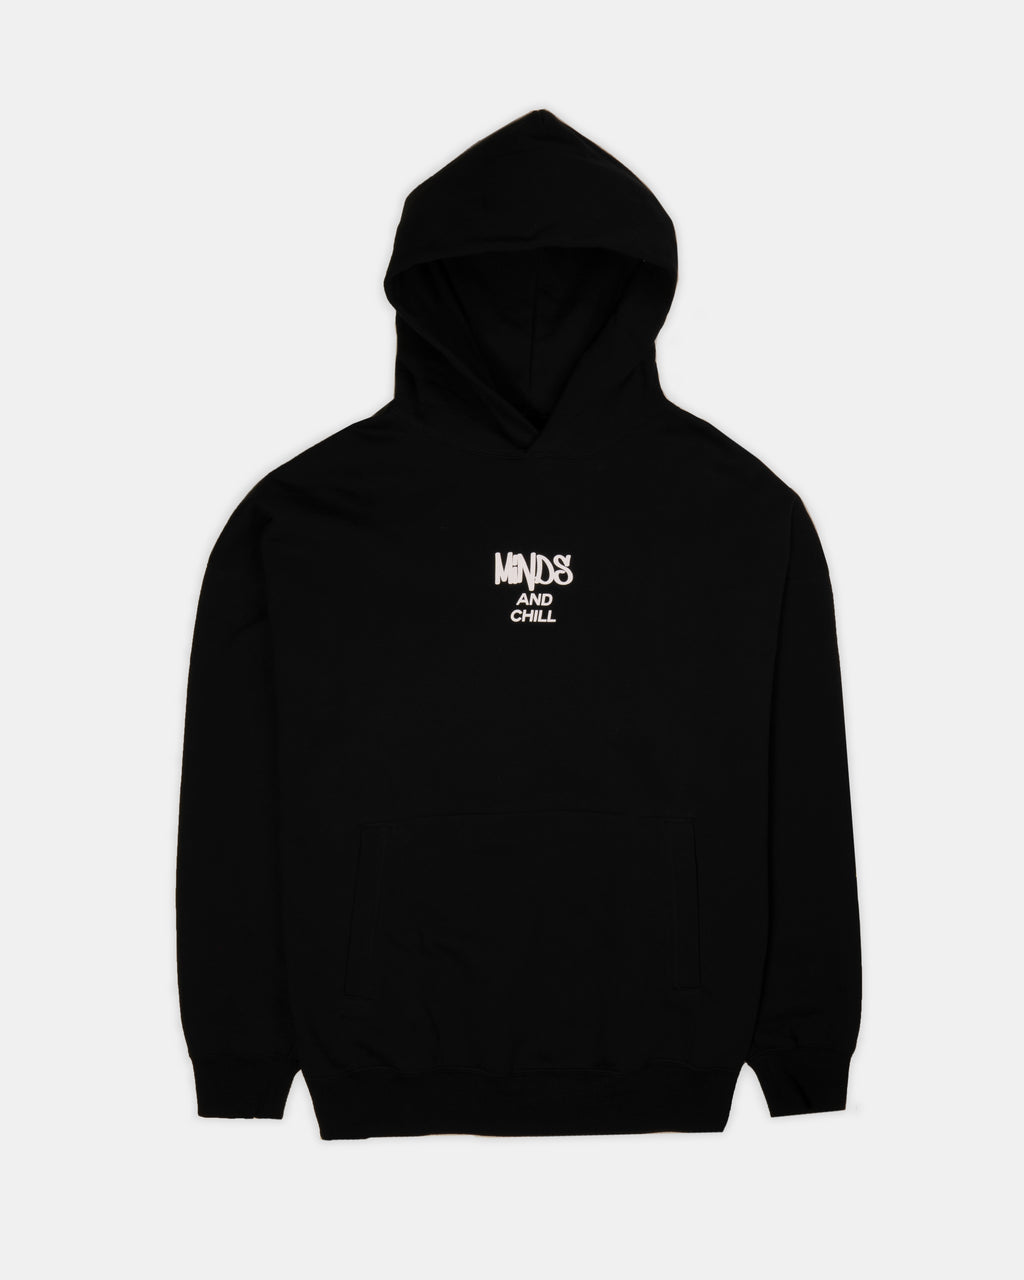 MINDS & CHILL HOODIE BLACK – TAIN DOUBLEPUSH